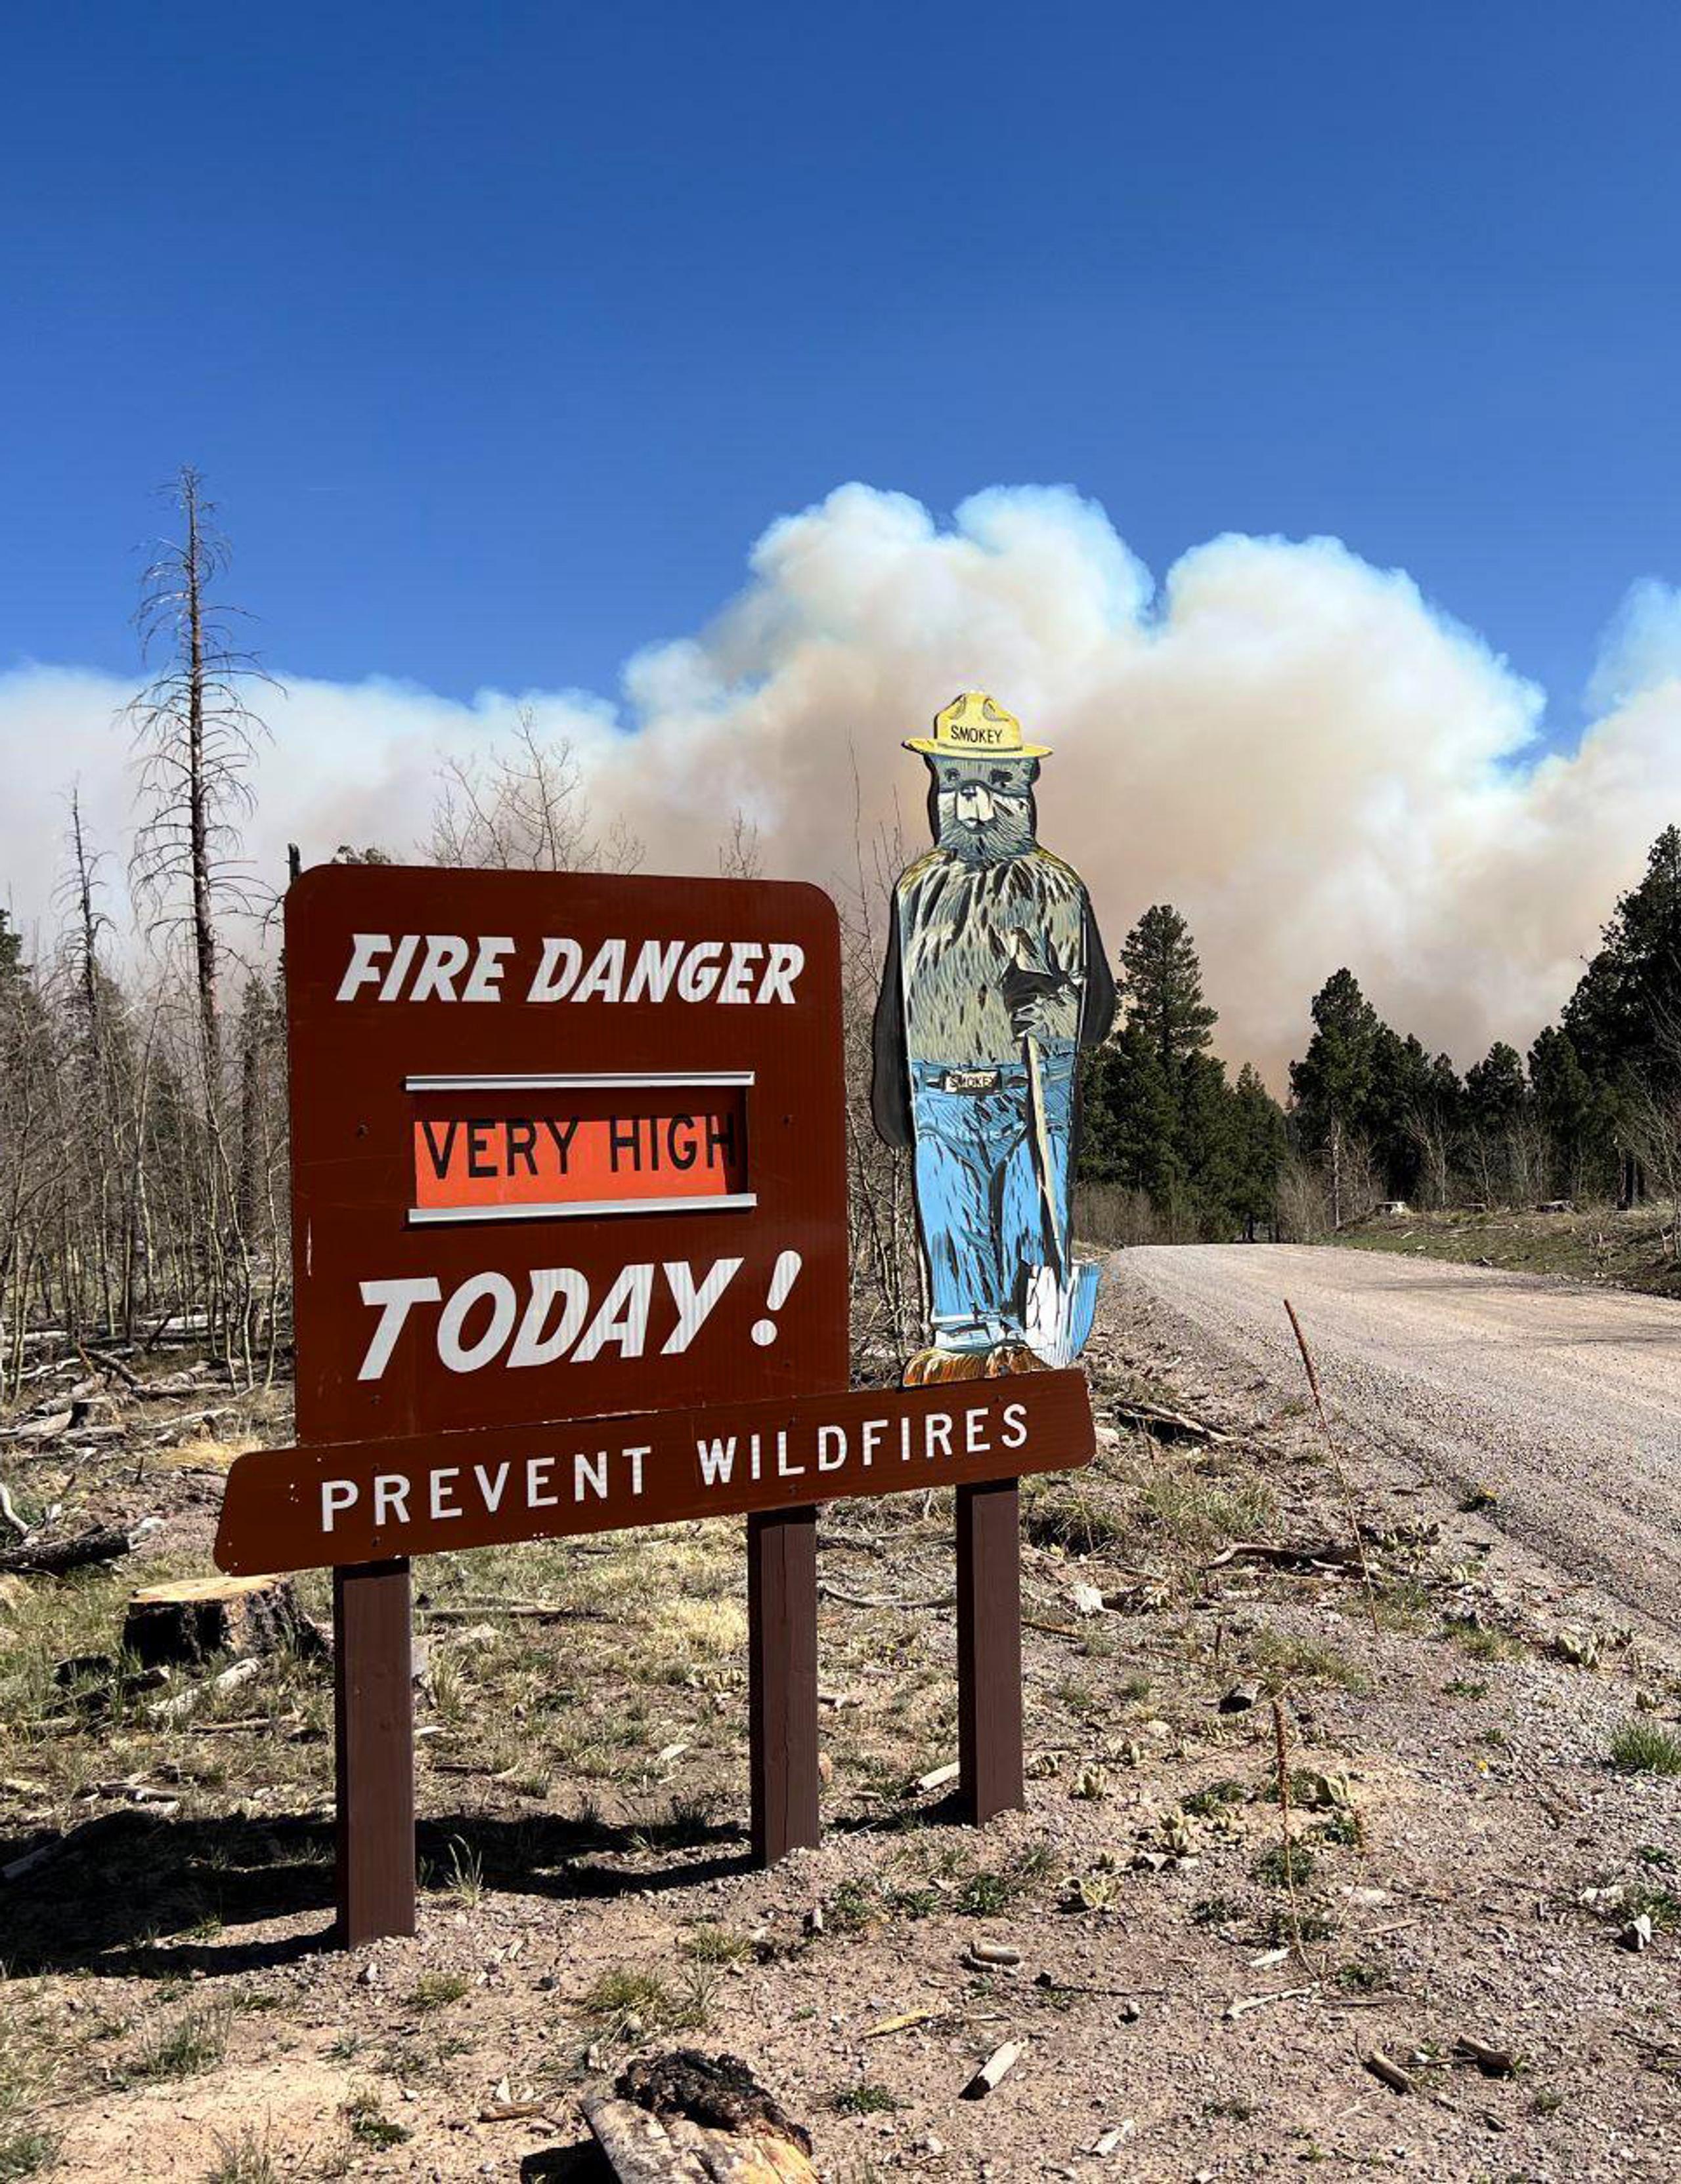 Smokey the Bear fire danger sign indicating VERY HIGH